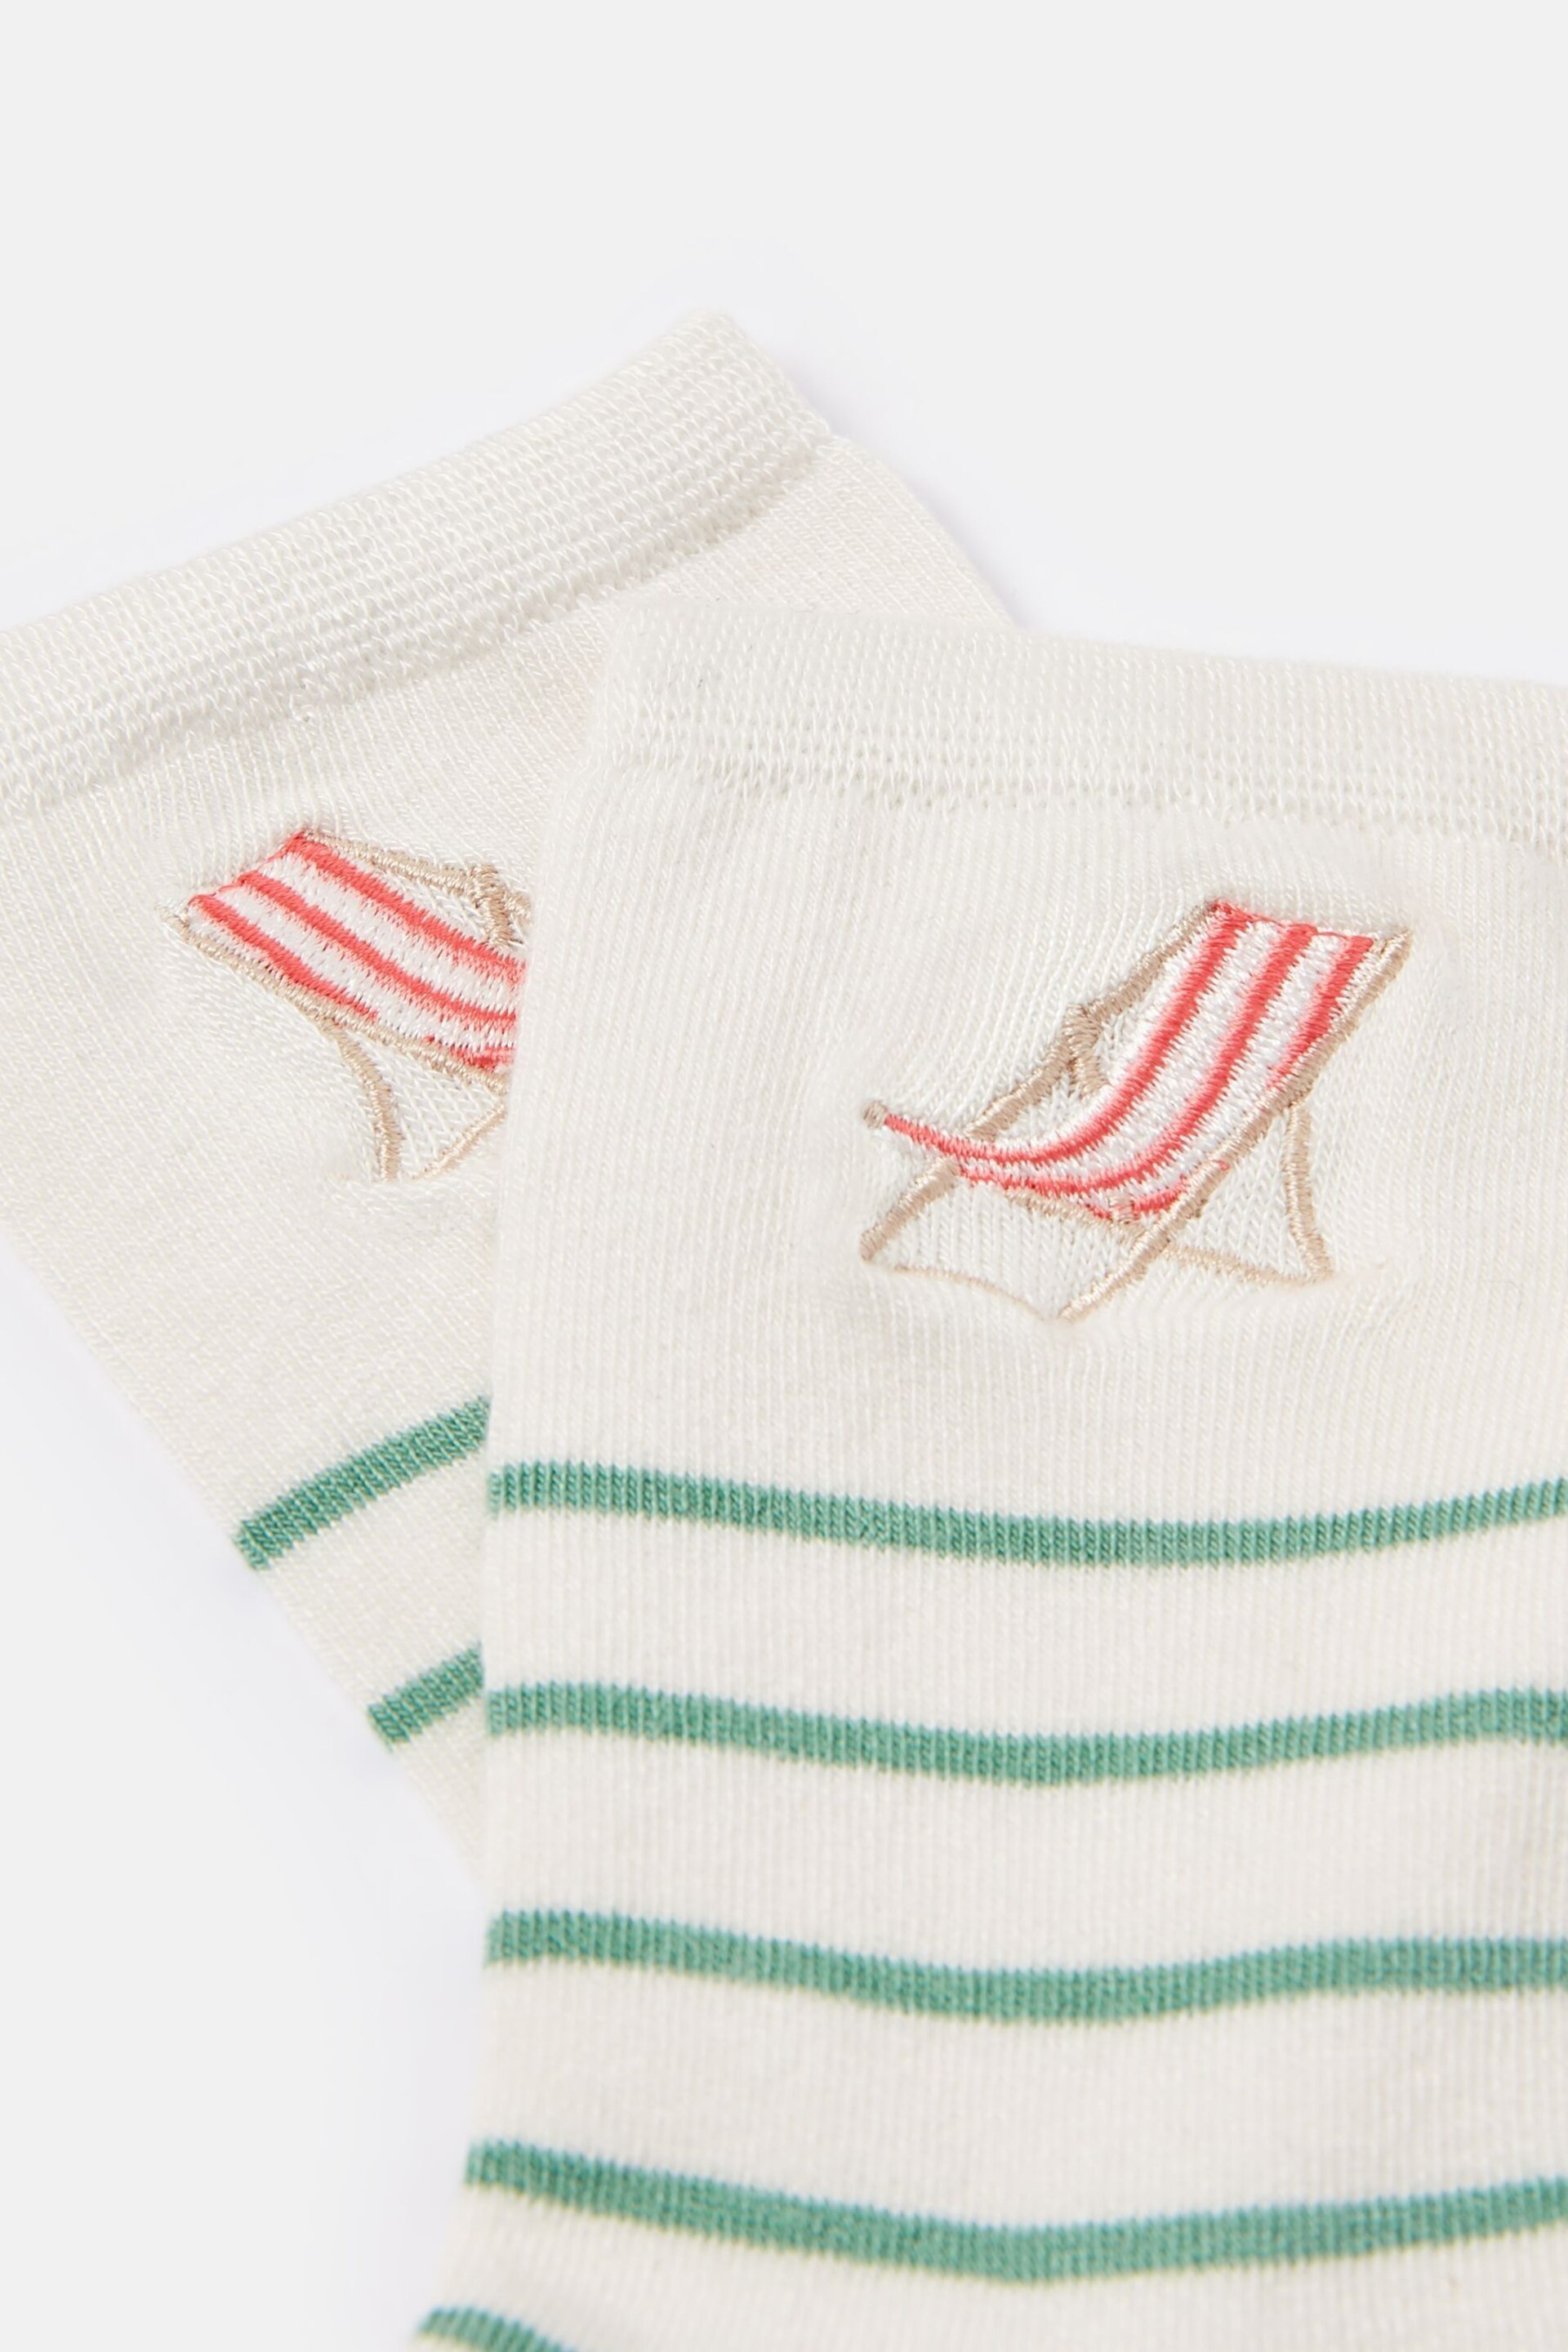 Joules Embroidered Green/White Ankle Socks - Image 3 of 3